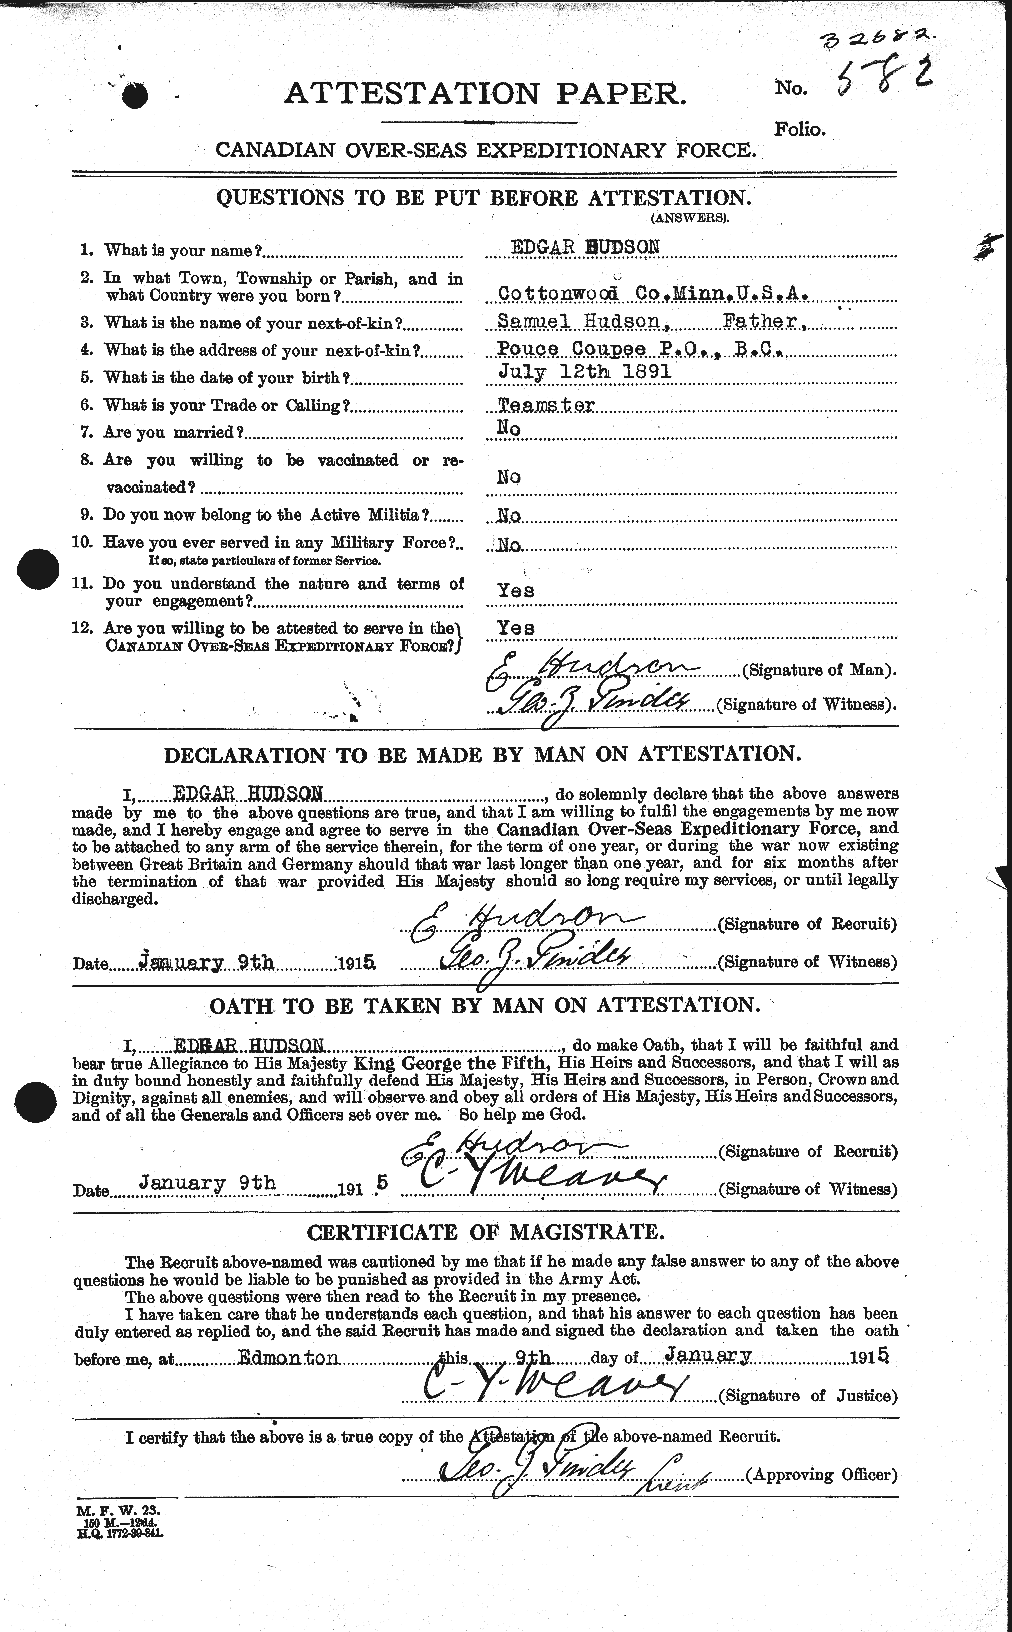 Personnel Records of the First World War - CEF 398887a